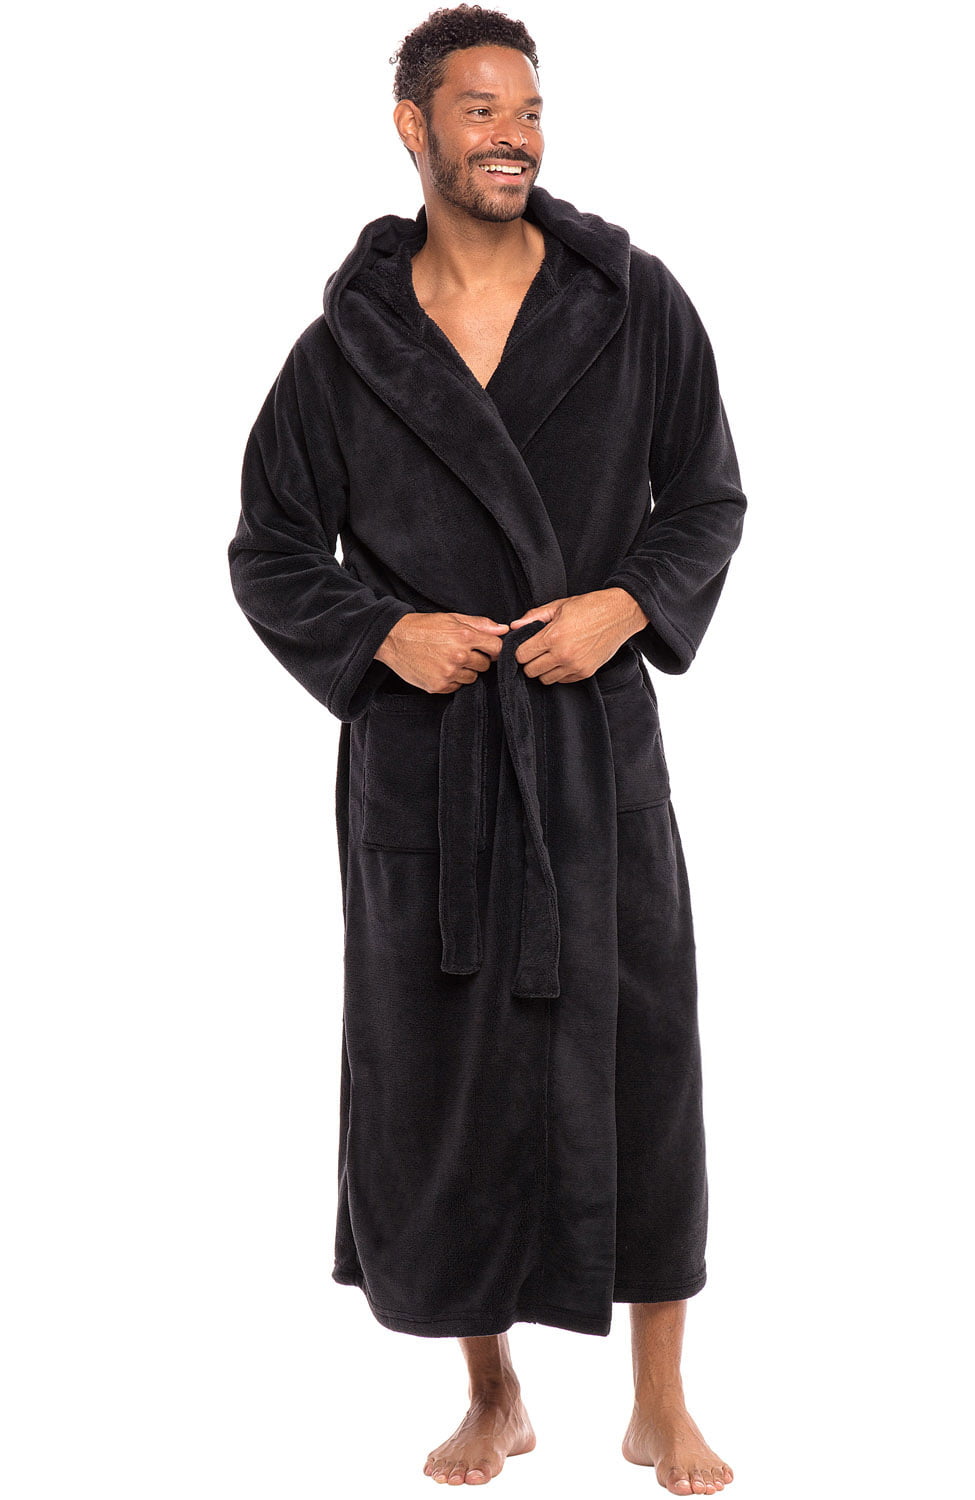 Wanted Mens Soft Lightweight Plush Fleece Robe with Front Pockets